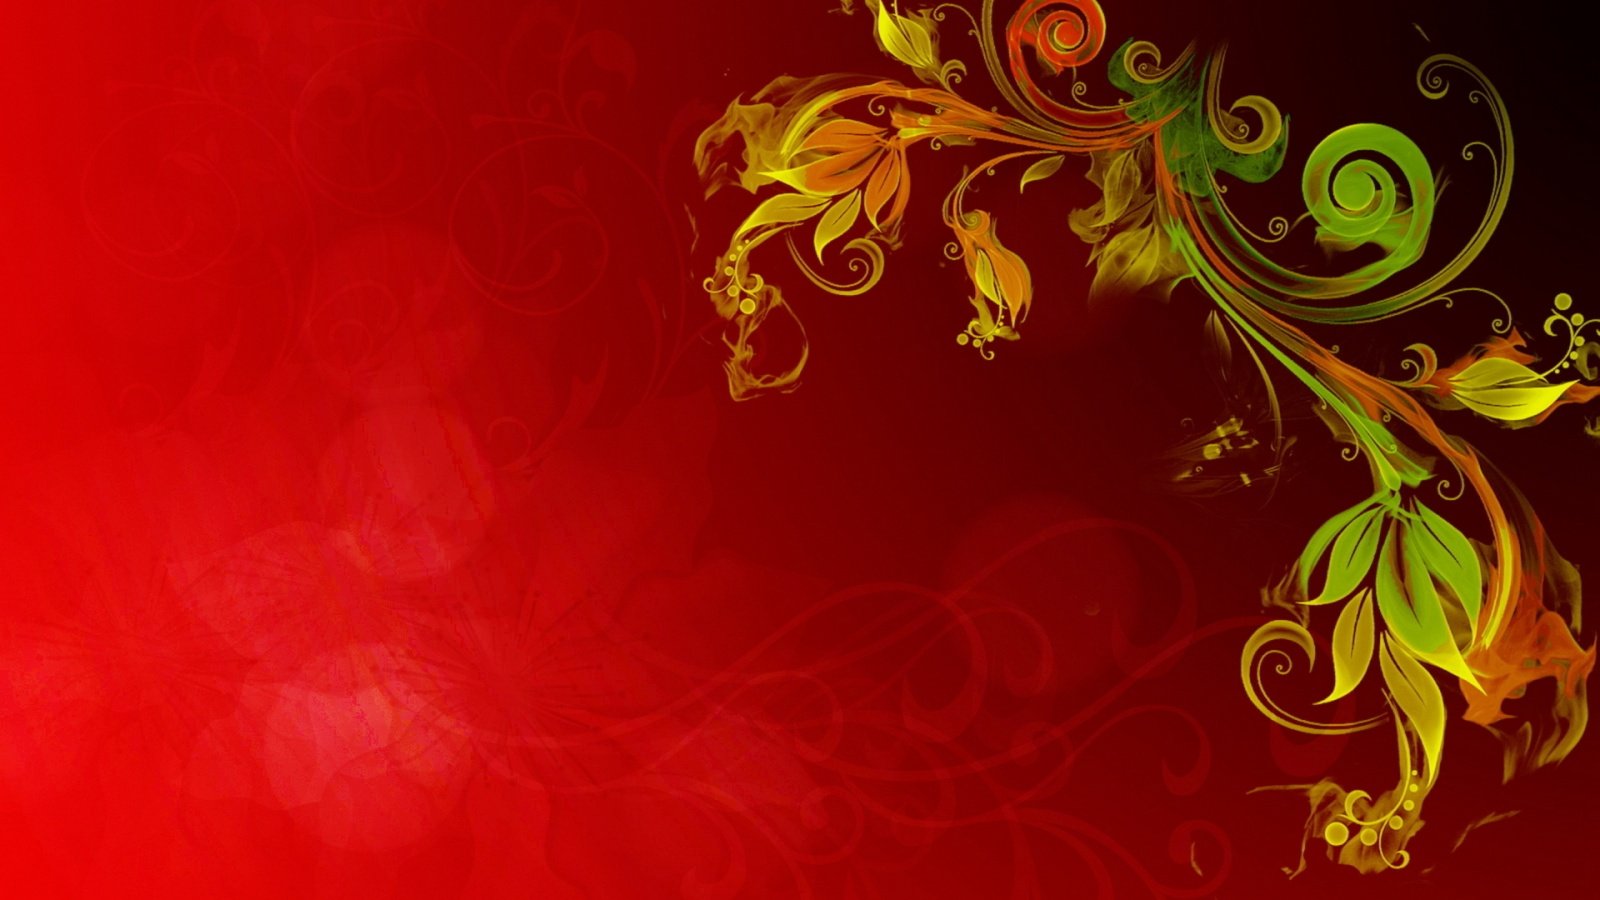 Abstract Swirls Windows 81 Theme And Wallpaper All For Windows 10